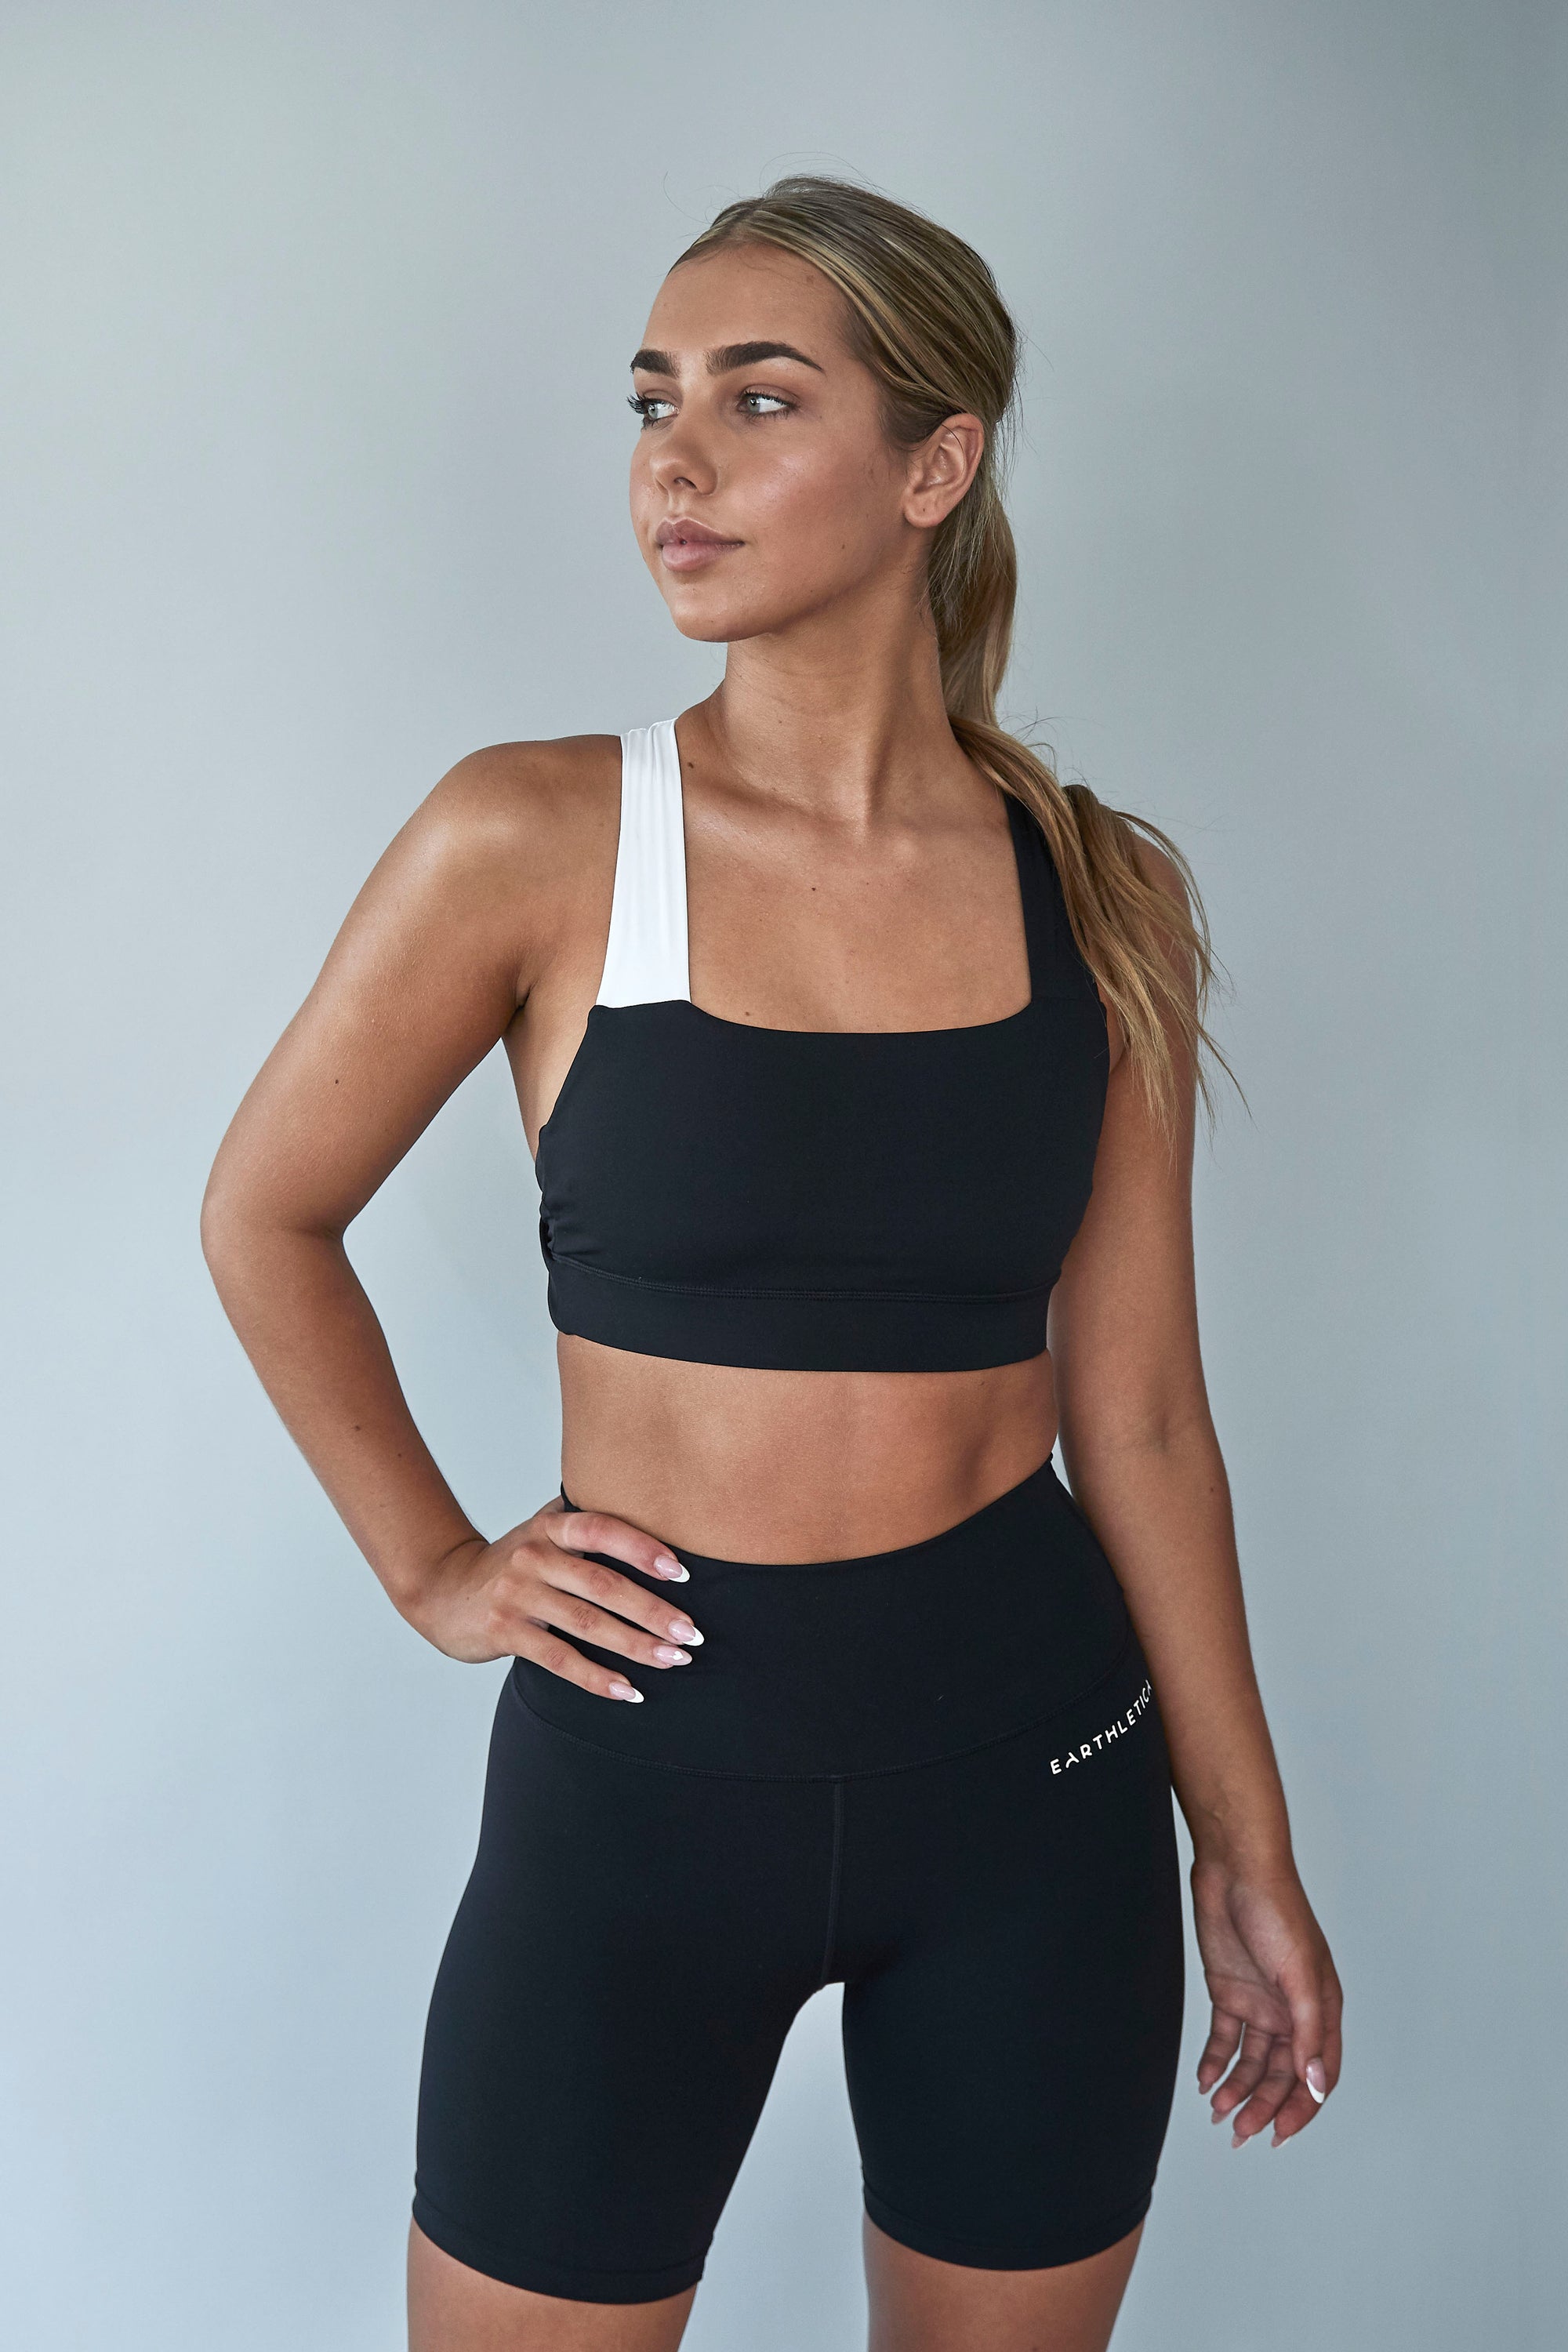 An Earthletica model wearing the Star Drop Crop + Midnight Bike Shorts activewear set. She is photographed from the front, with one hand on her hip.